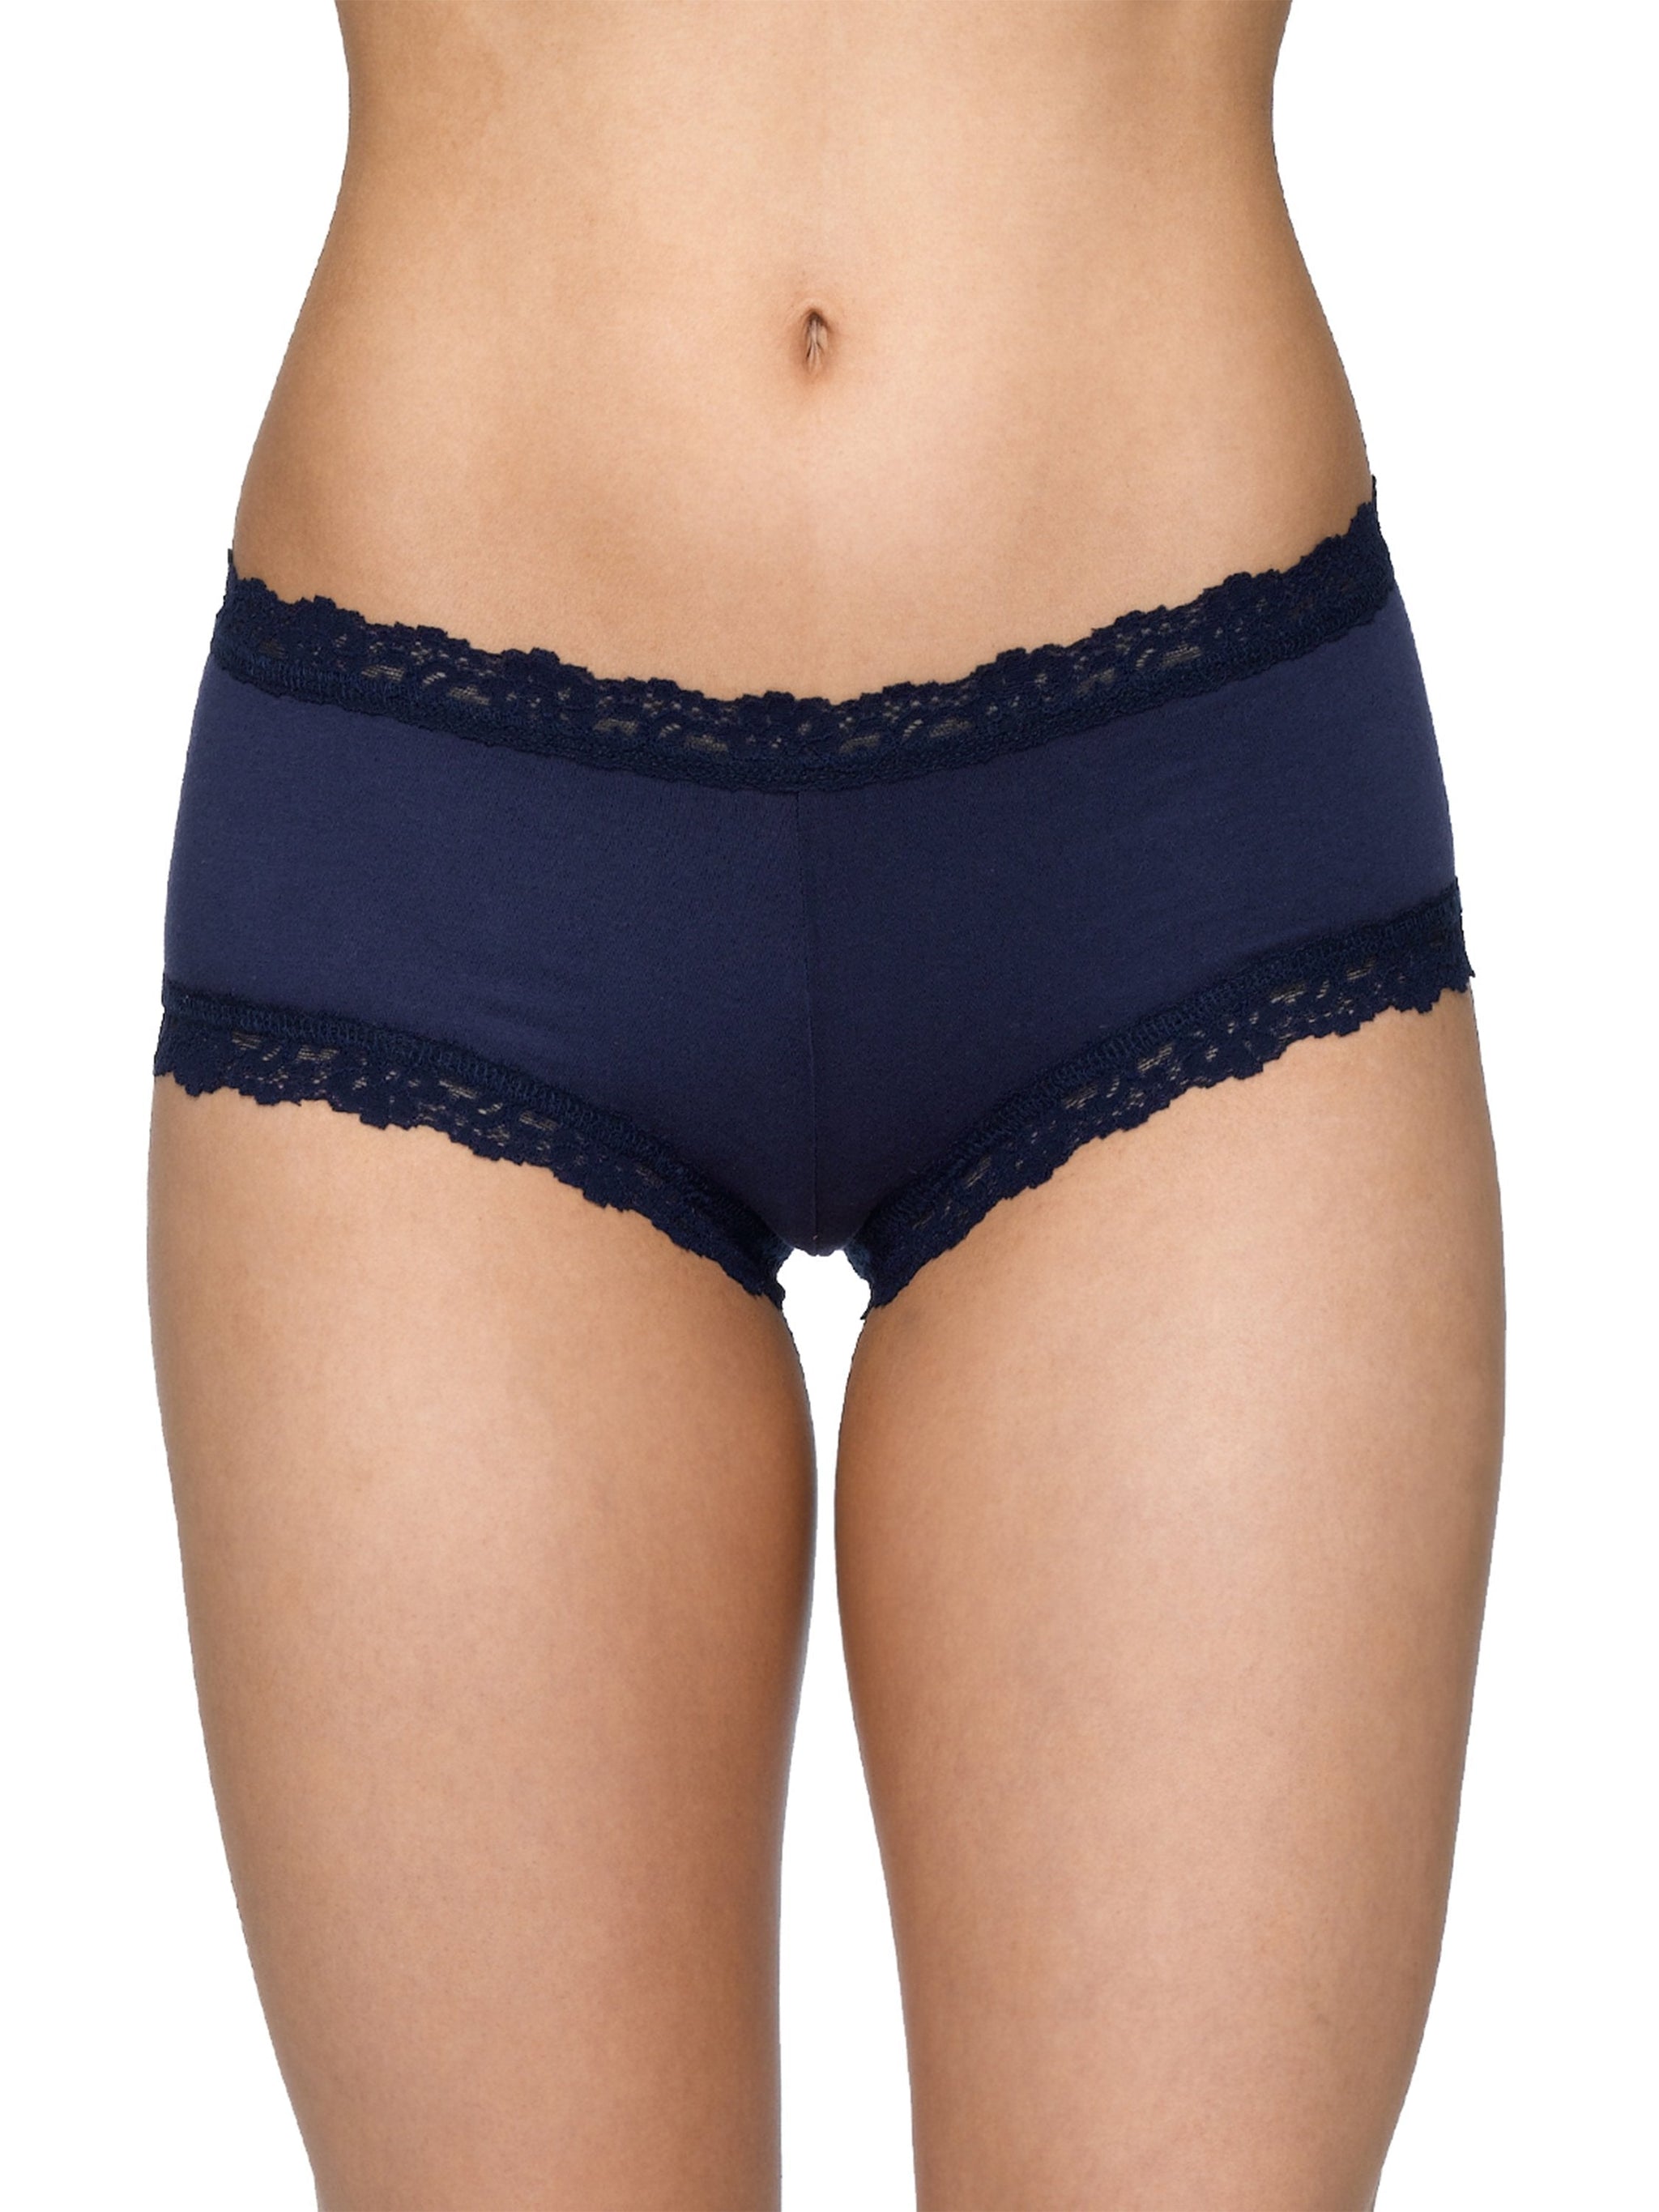 Pattern Cheeky Hipster Panty Cheery Cherries XS by Hanky Panky